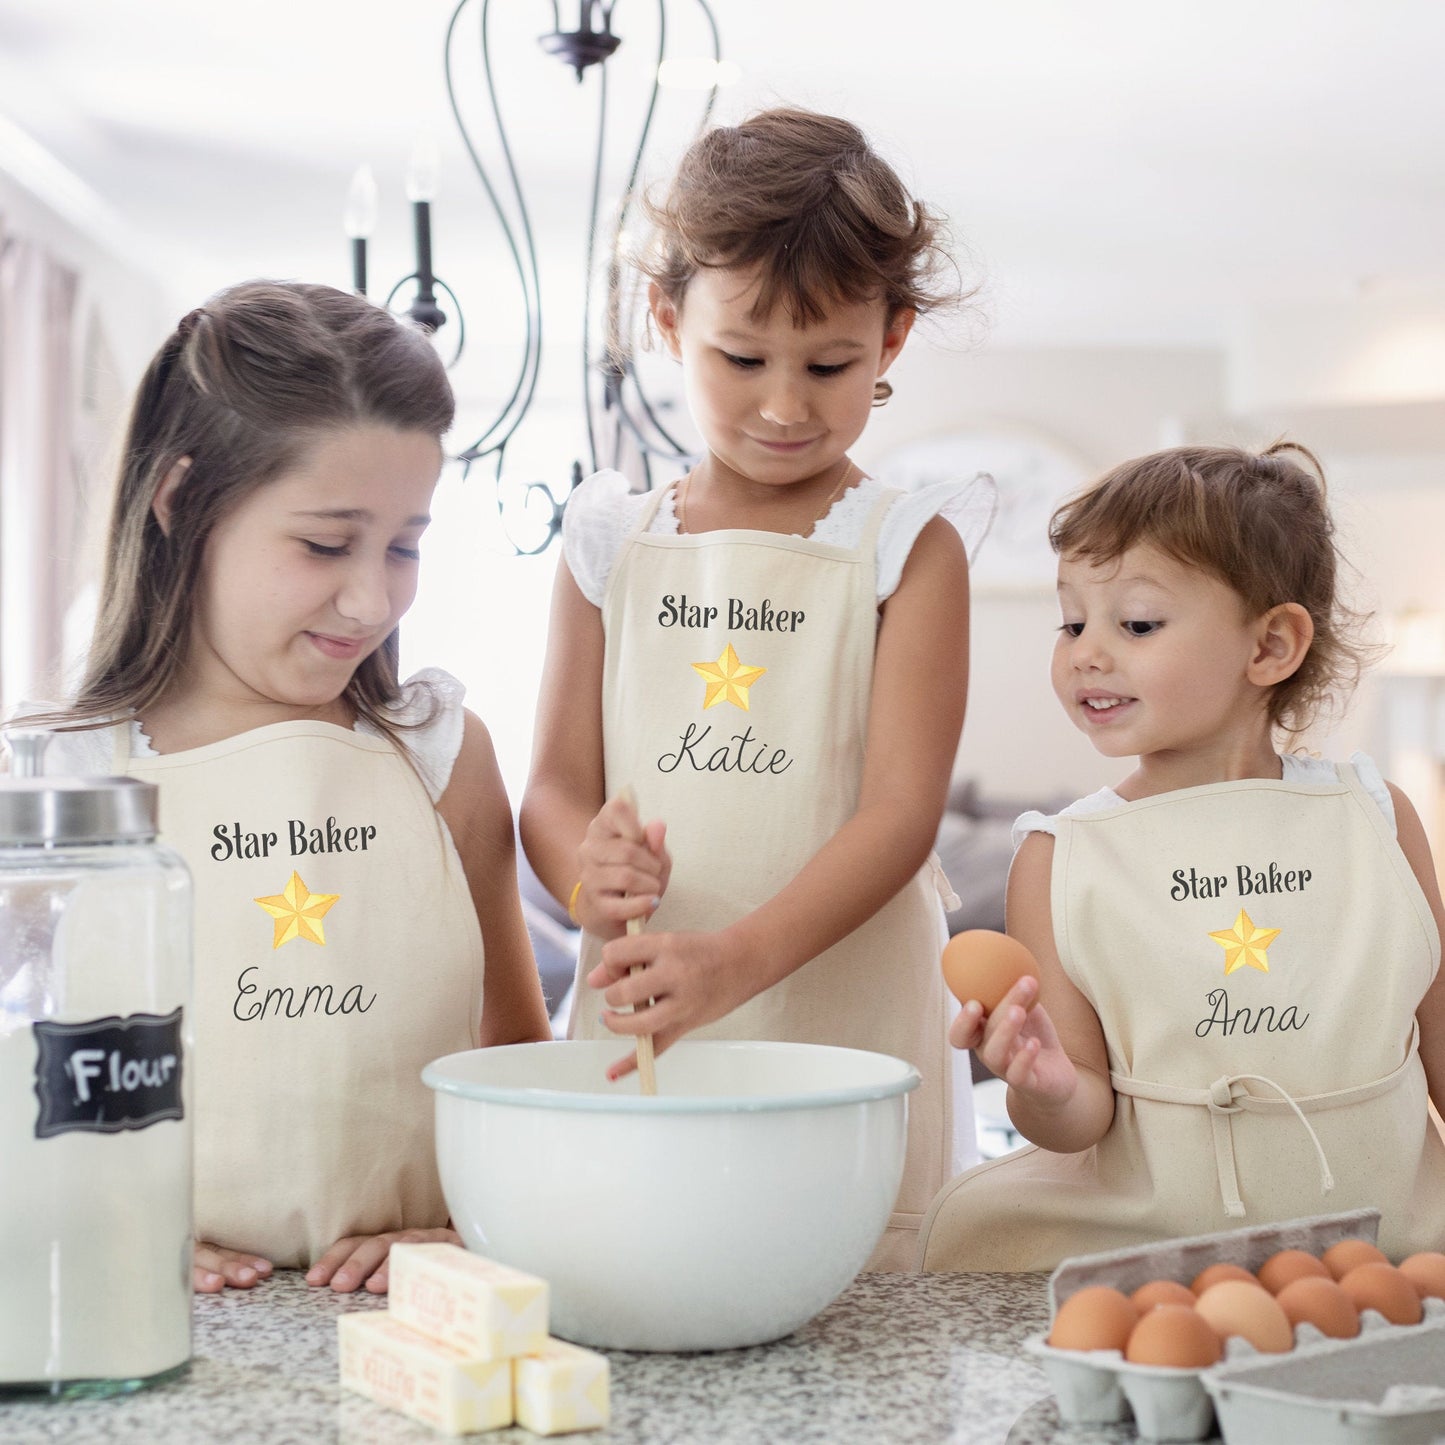 Load image into Gallery viewer, Star Baker Kids Apron | Youth Kids Apron | Child Apron | Full Kids Kitchen Apron | Kid Baking Apron | Kid Apron | Cotton Canvas Full Apron - Sweet Hooligans Design
